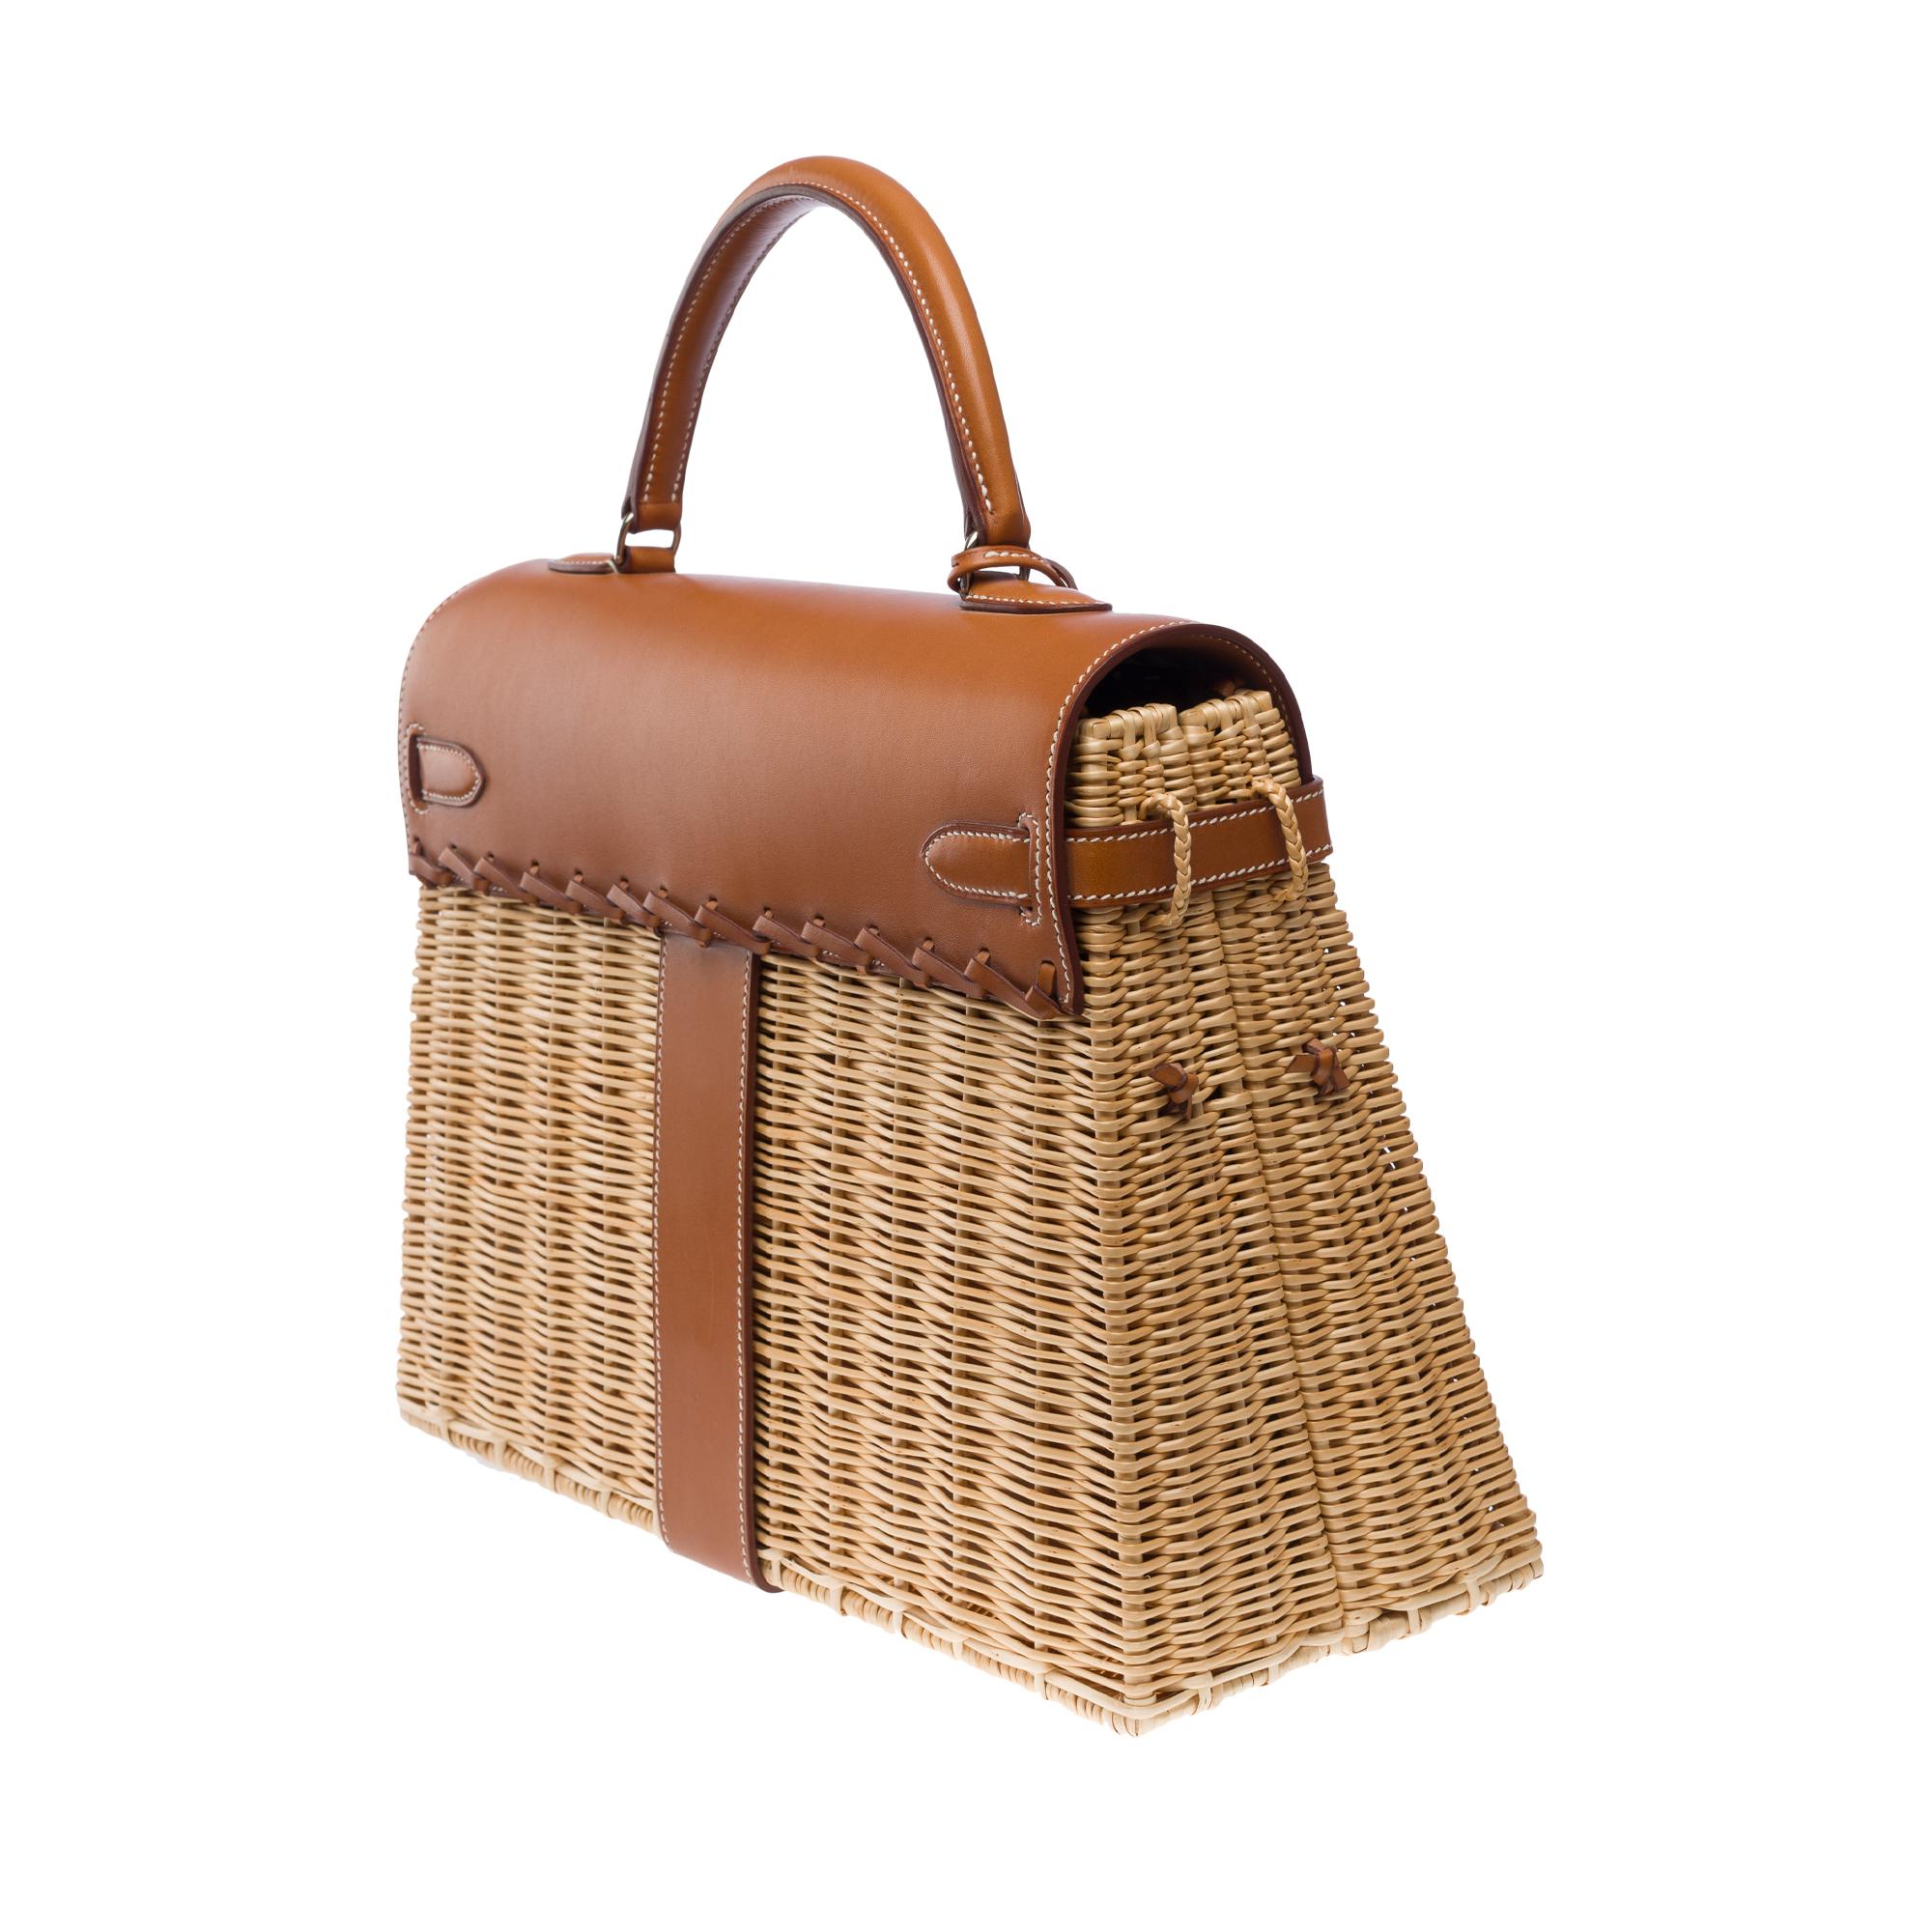 Rare Hermes Kelly 35 Picnic in wicker and barenia leather , SHW 2